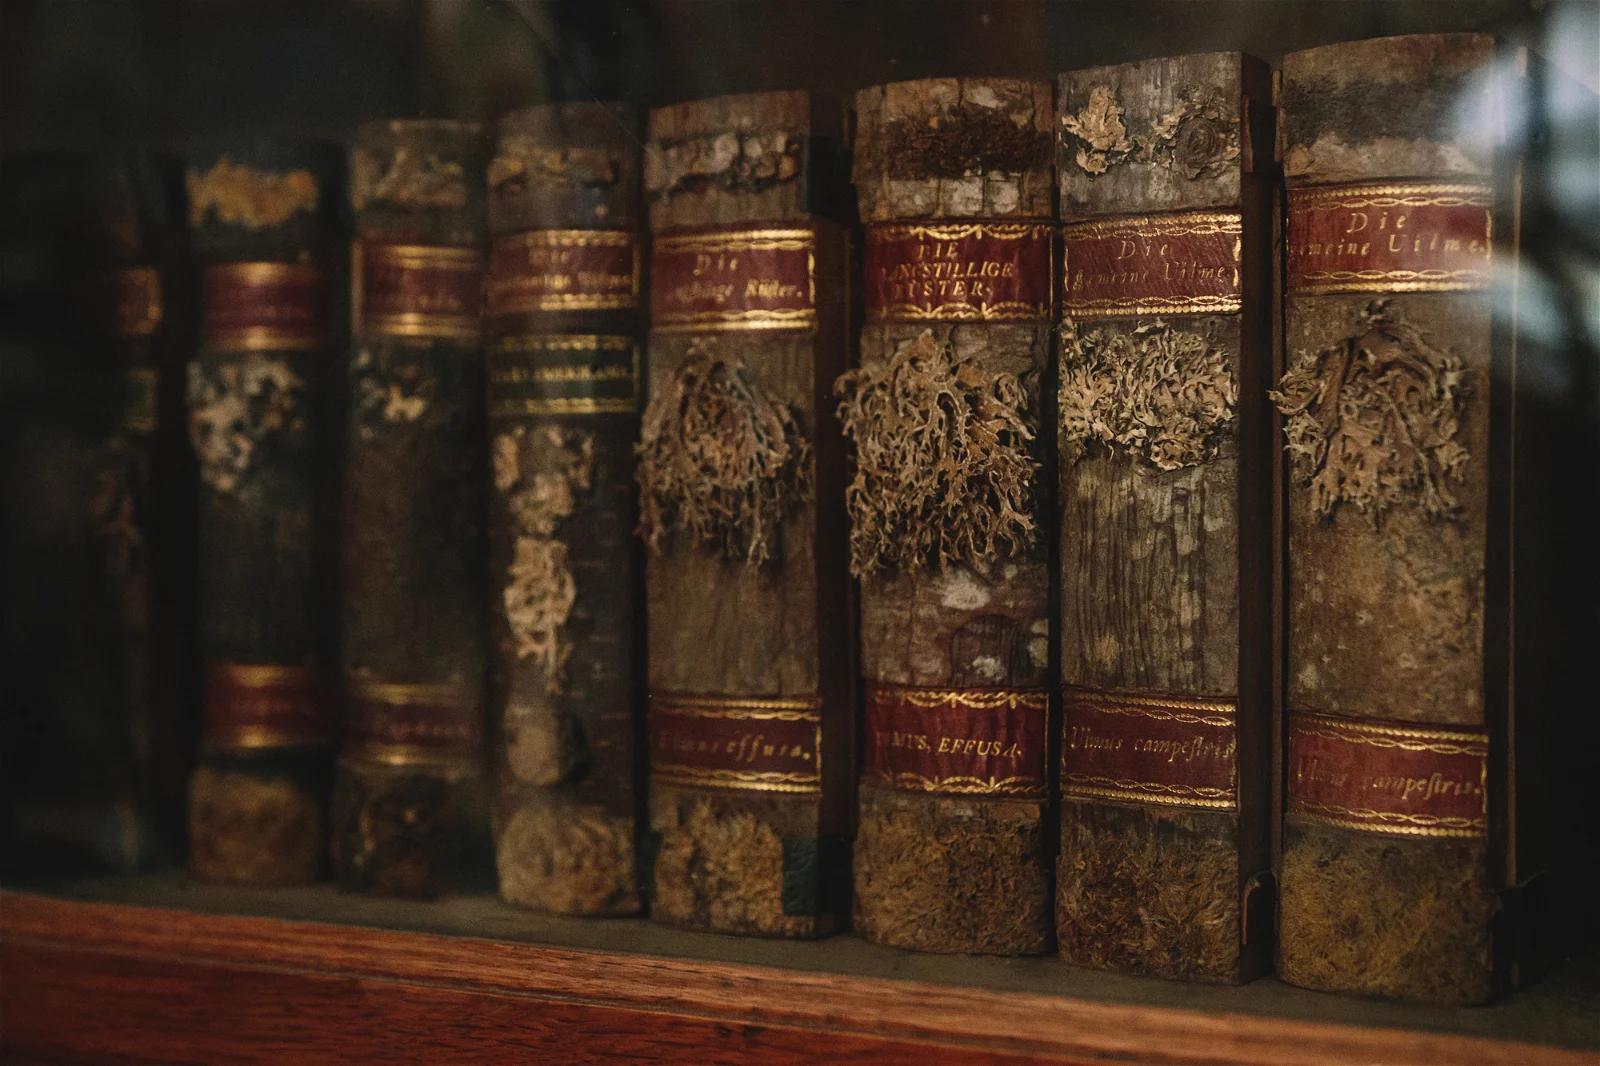 A close-up of aged, ornate leather-bound books on a shelf, signifying a collection of valuable and possibly ancient literature.
